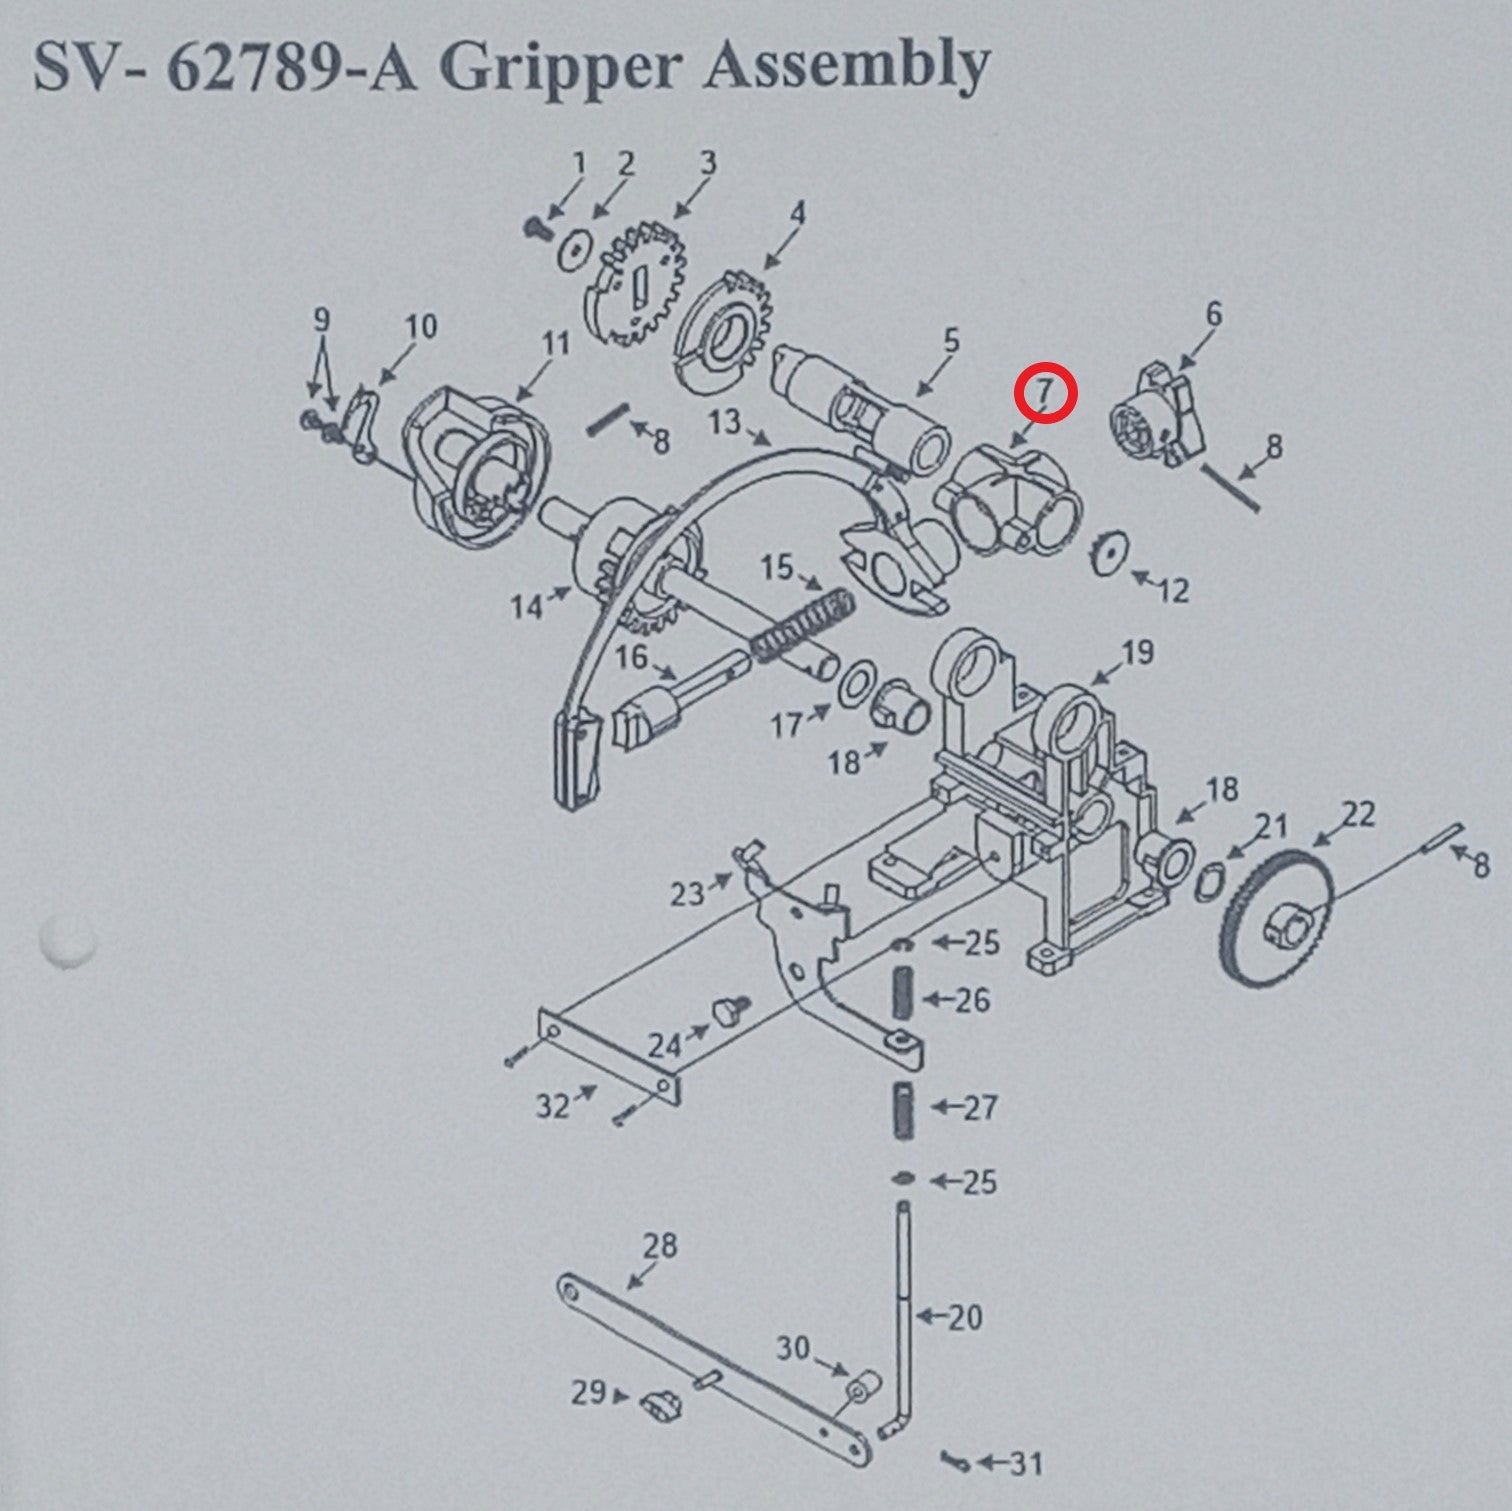 Rock-Ola Cam Gripper Spider Assembly (34315-07-LF)